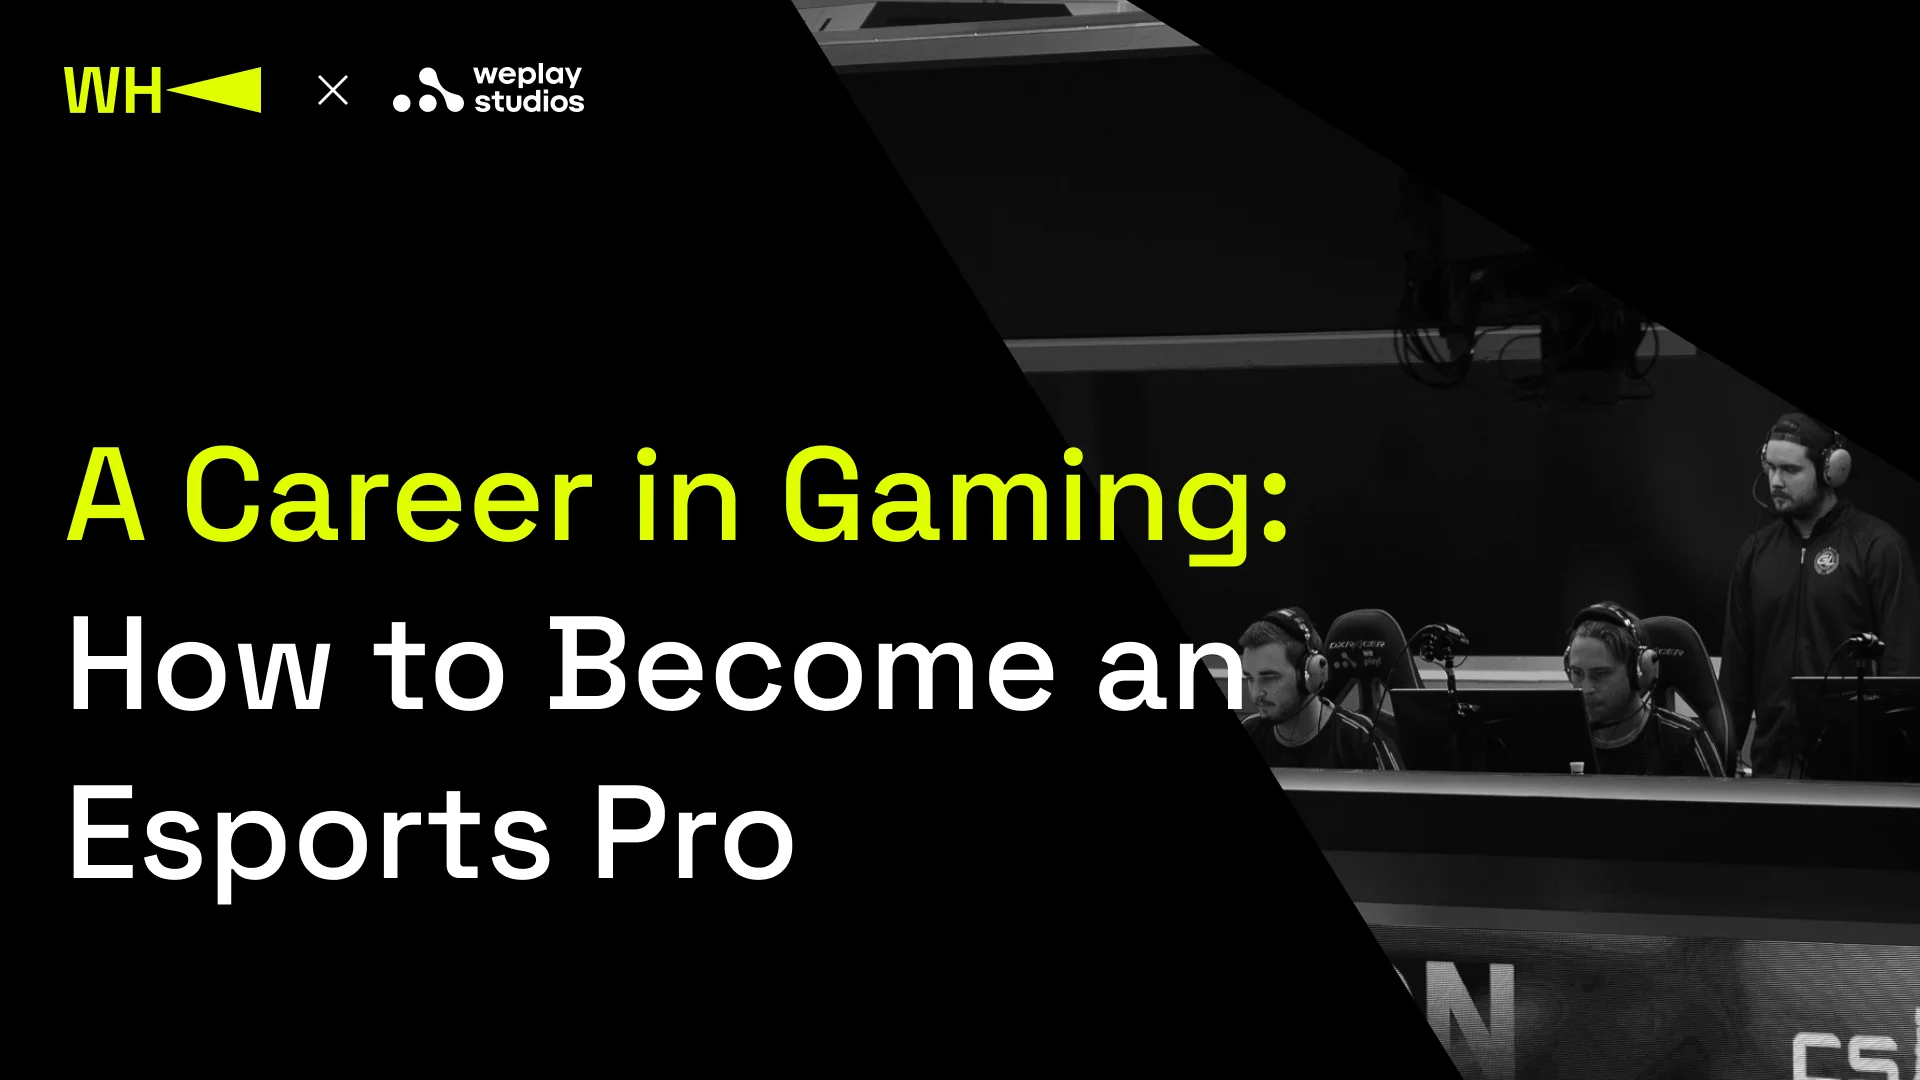 A Career in Gaming: How to Become an Esports Pro